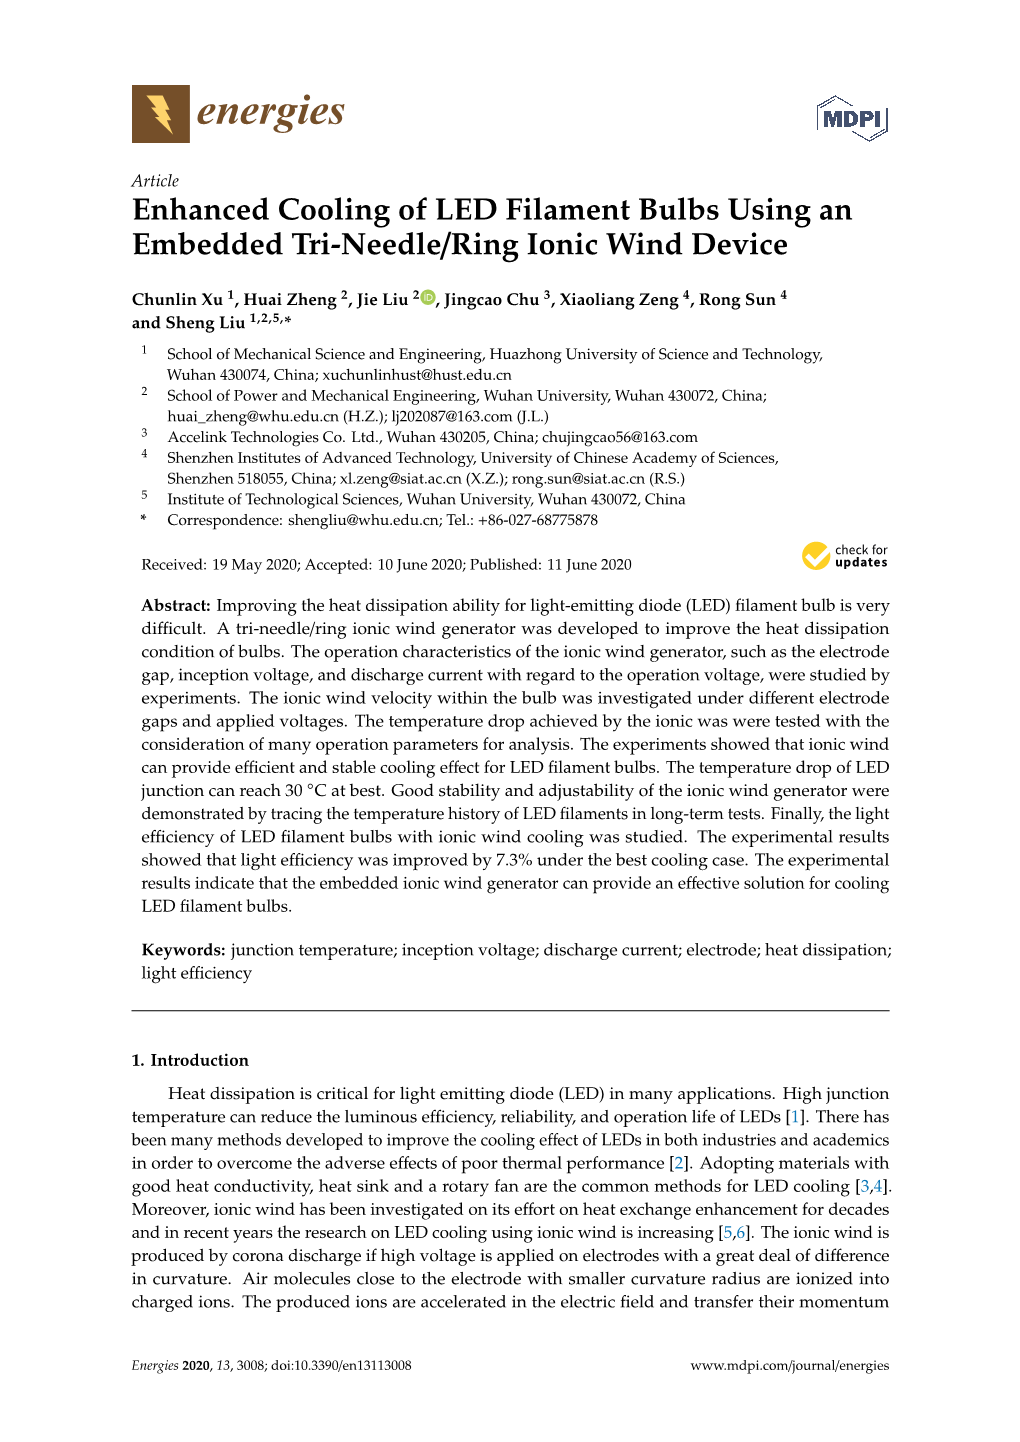 Enhanced Cooling of LED Filament Bulbs Using an Embedded Tri-Needle/Ring Ionic Wind Device